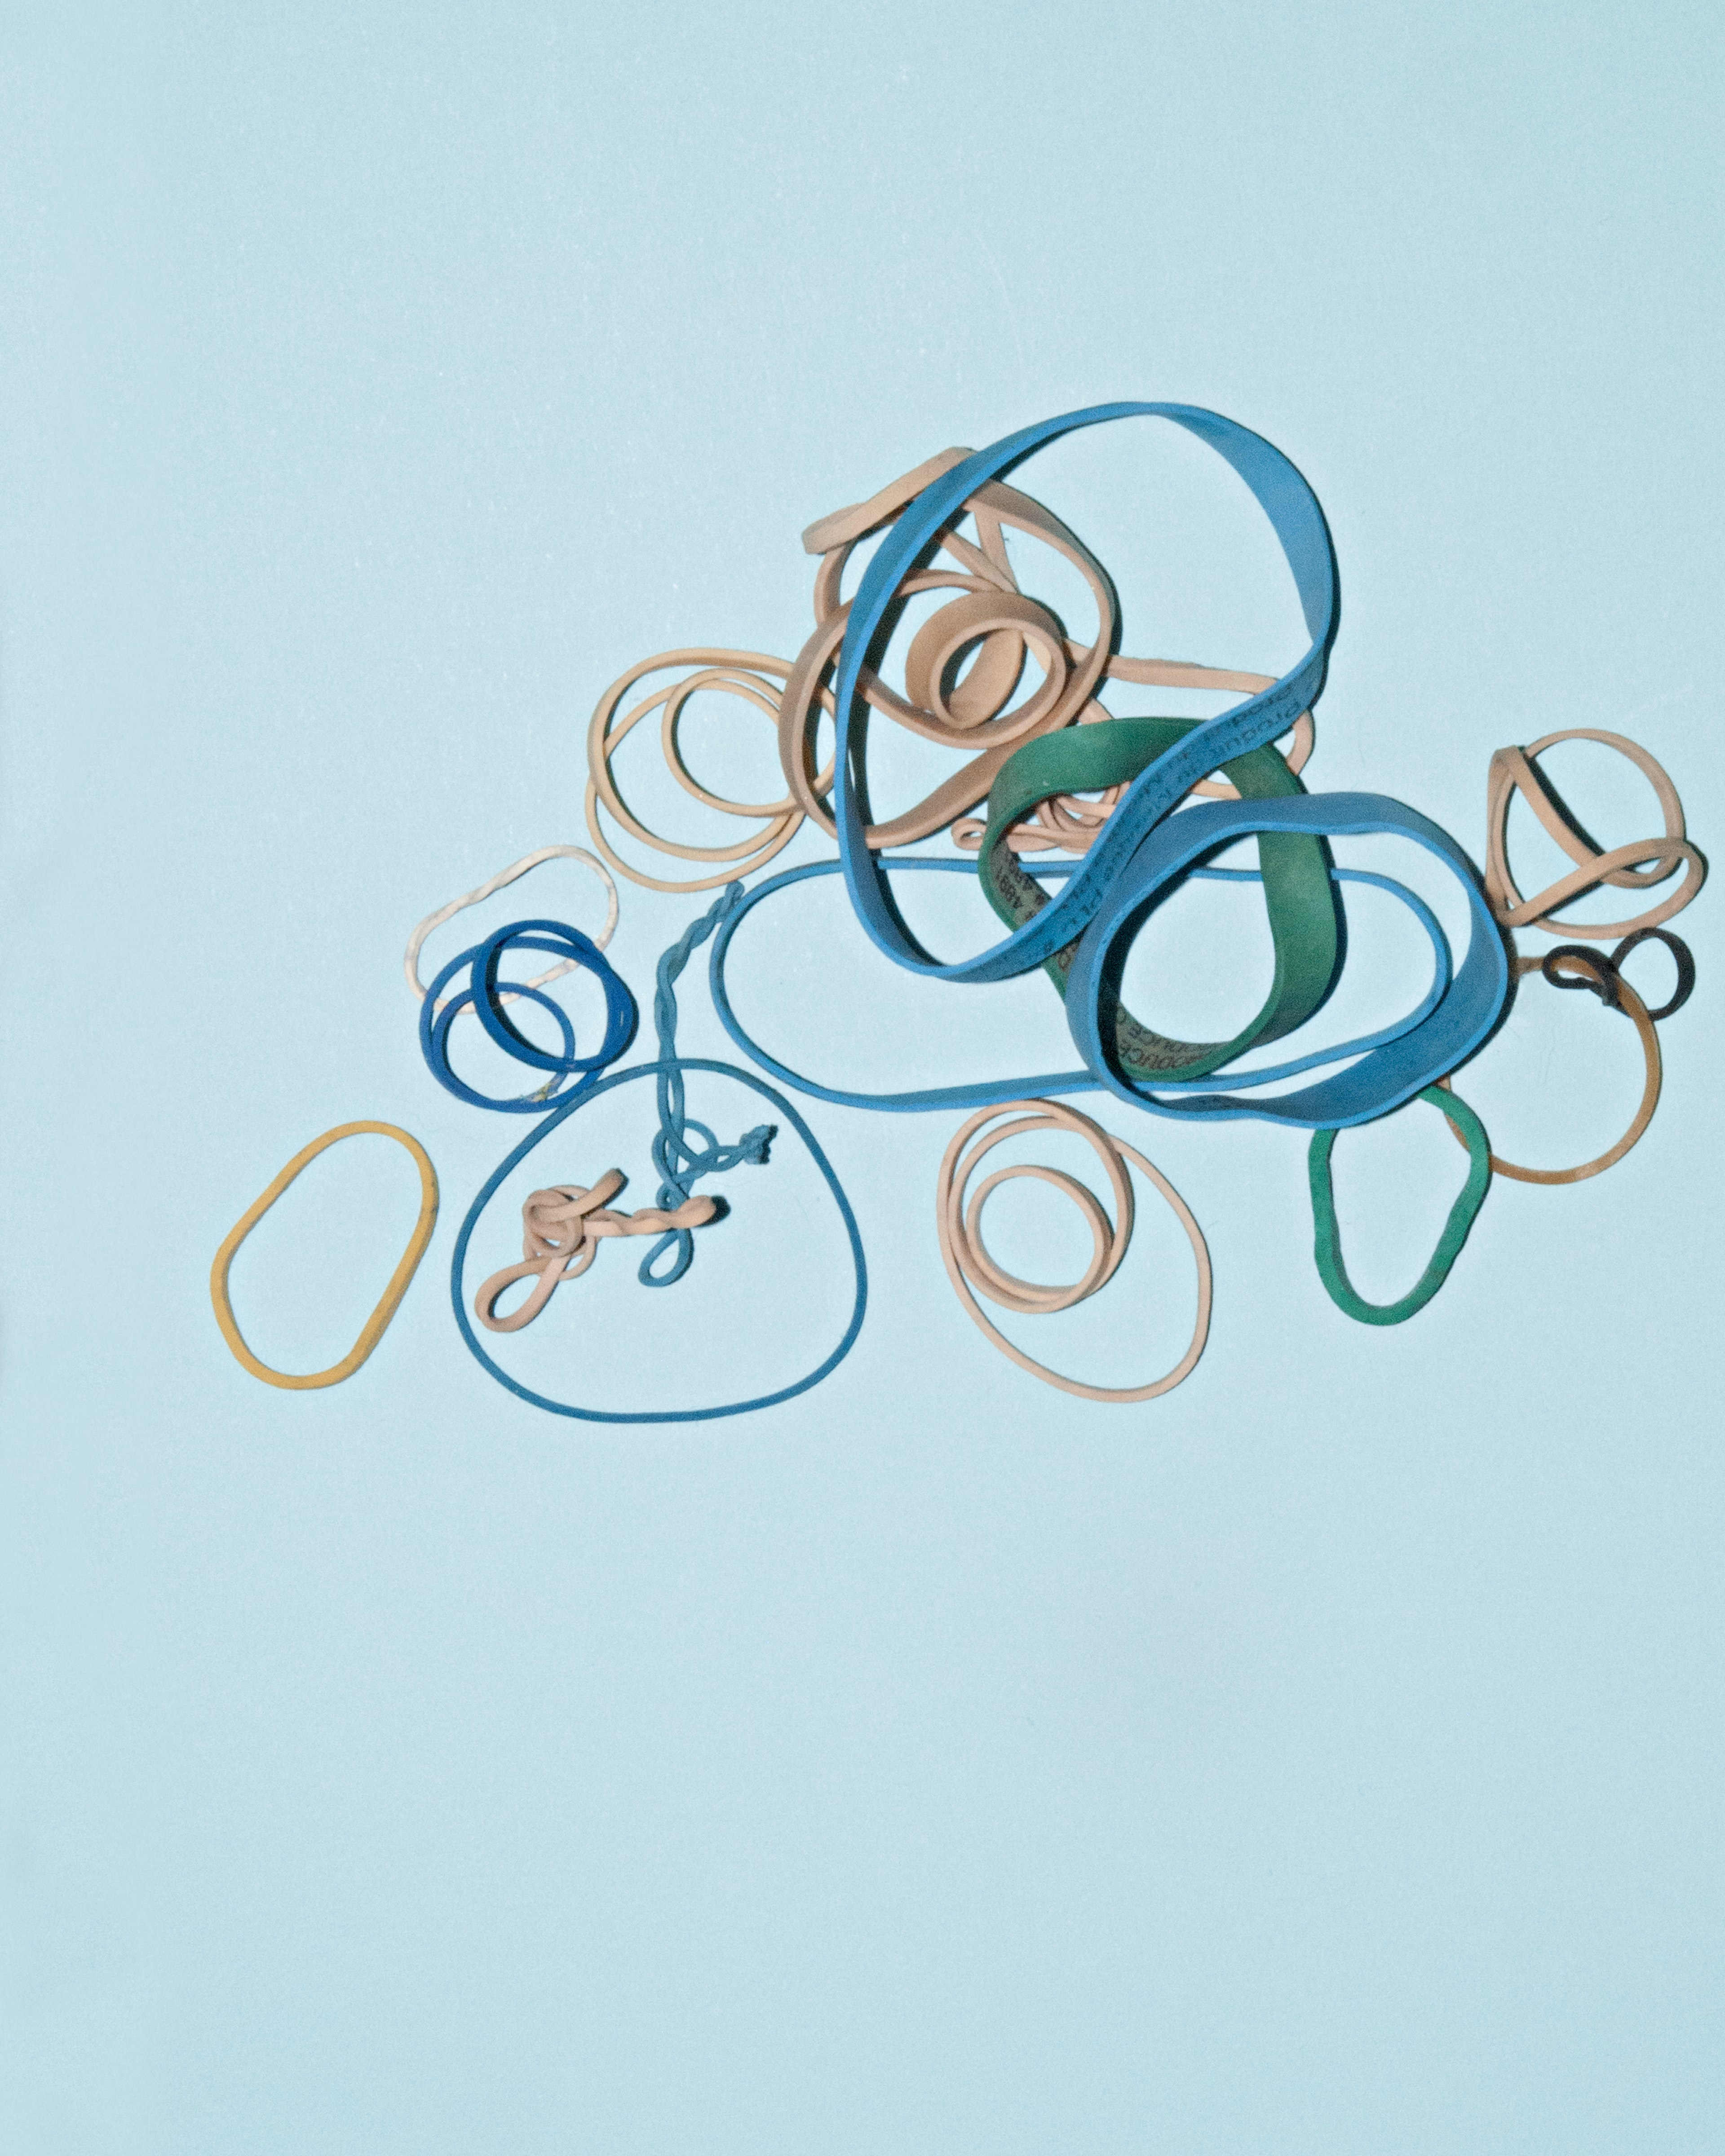 Beige, yellow, and blue loom bands, by Michael Walter on Unsplash